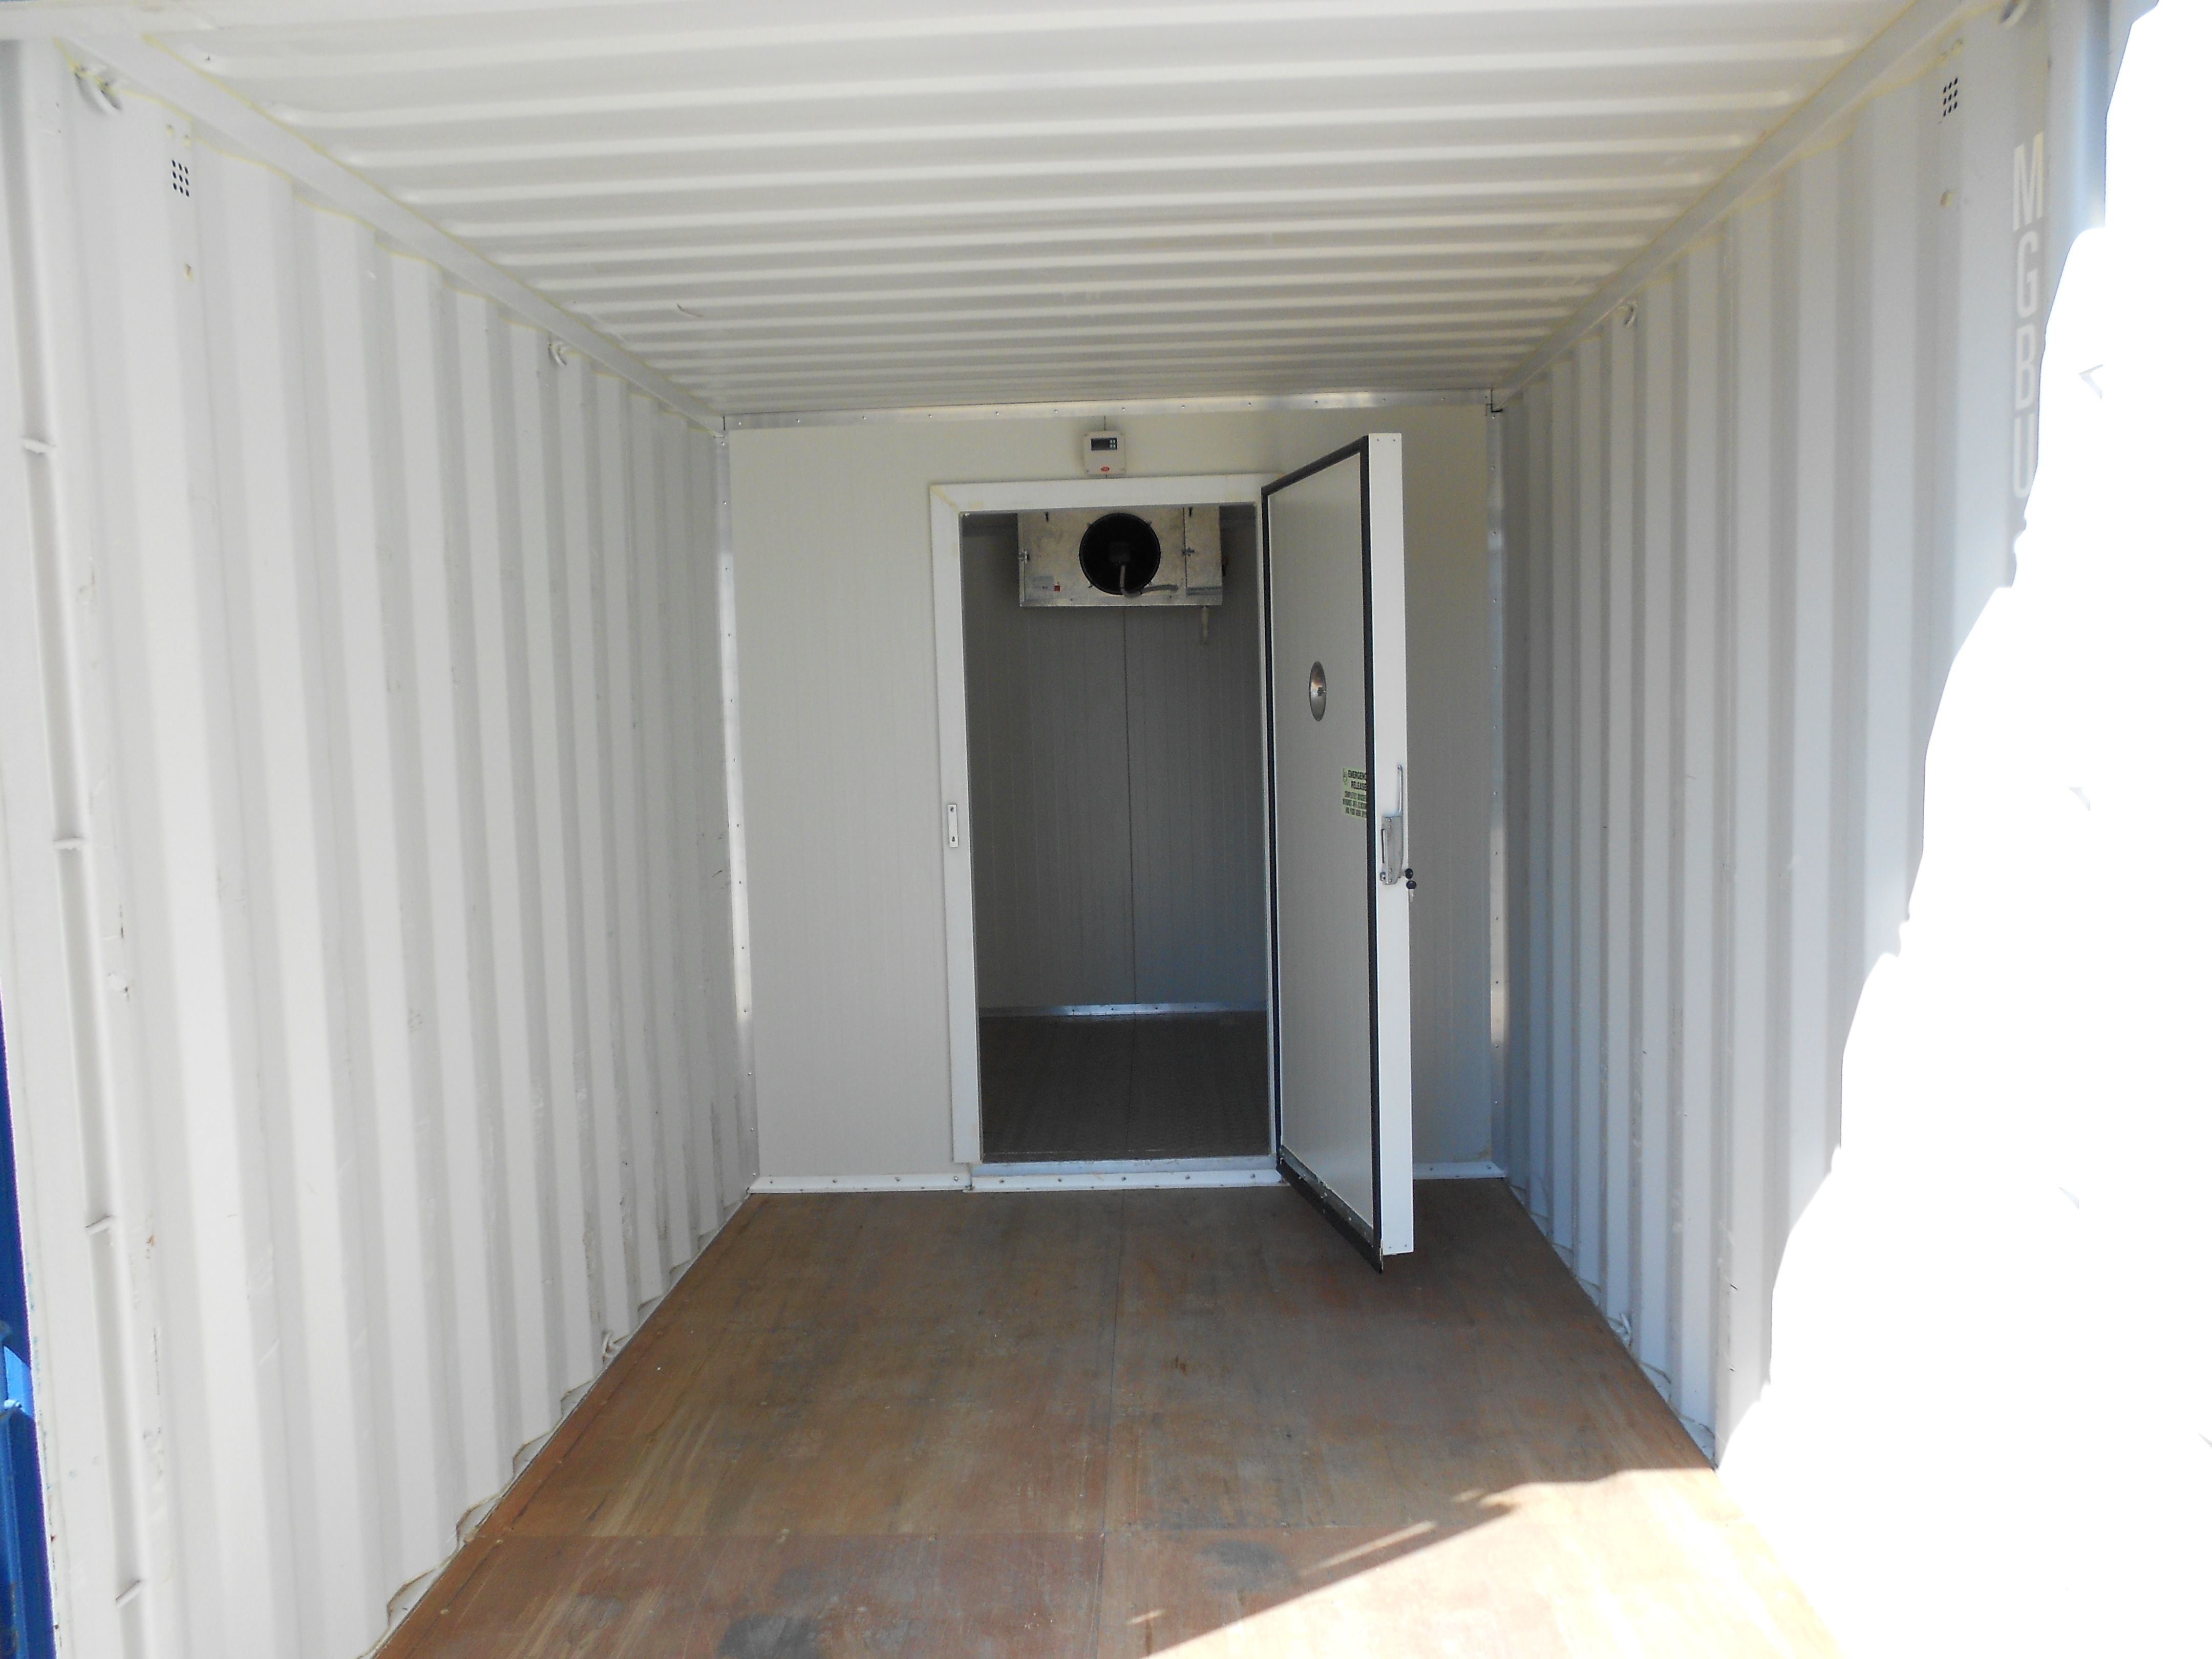 Bulkhead System for Cargo Containers